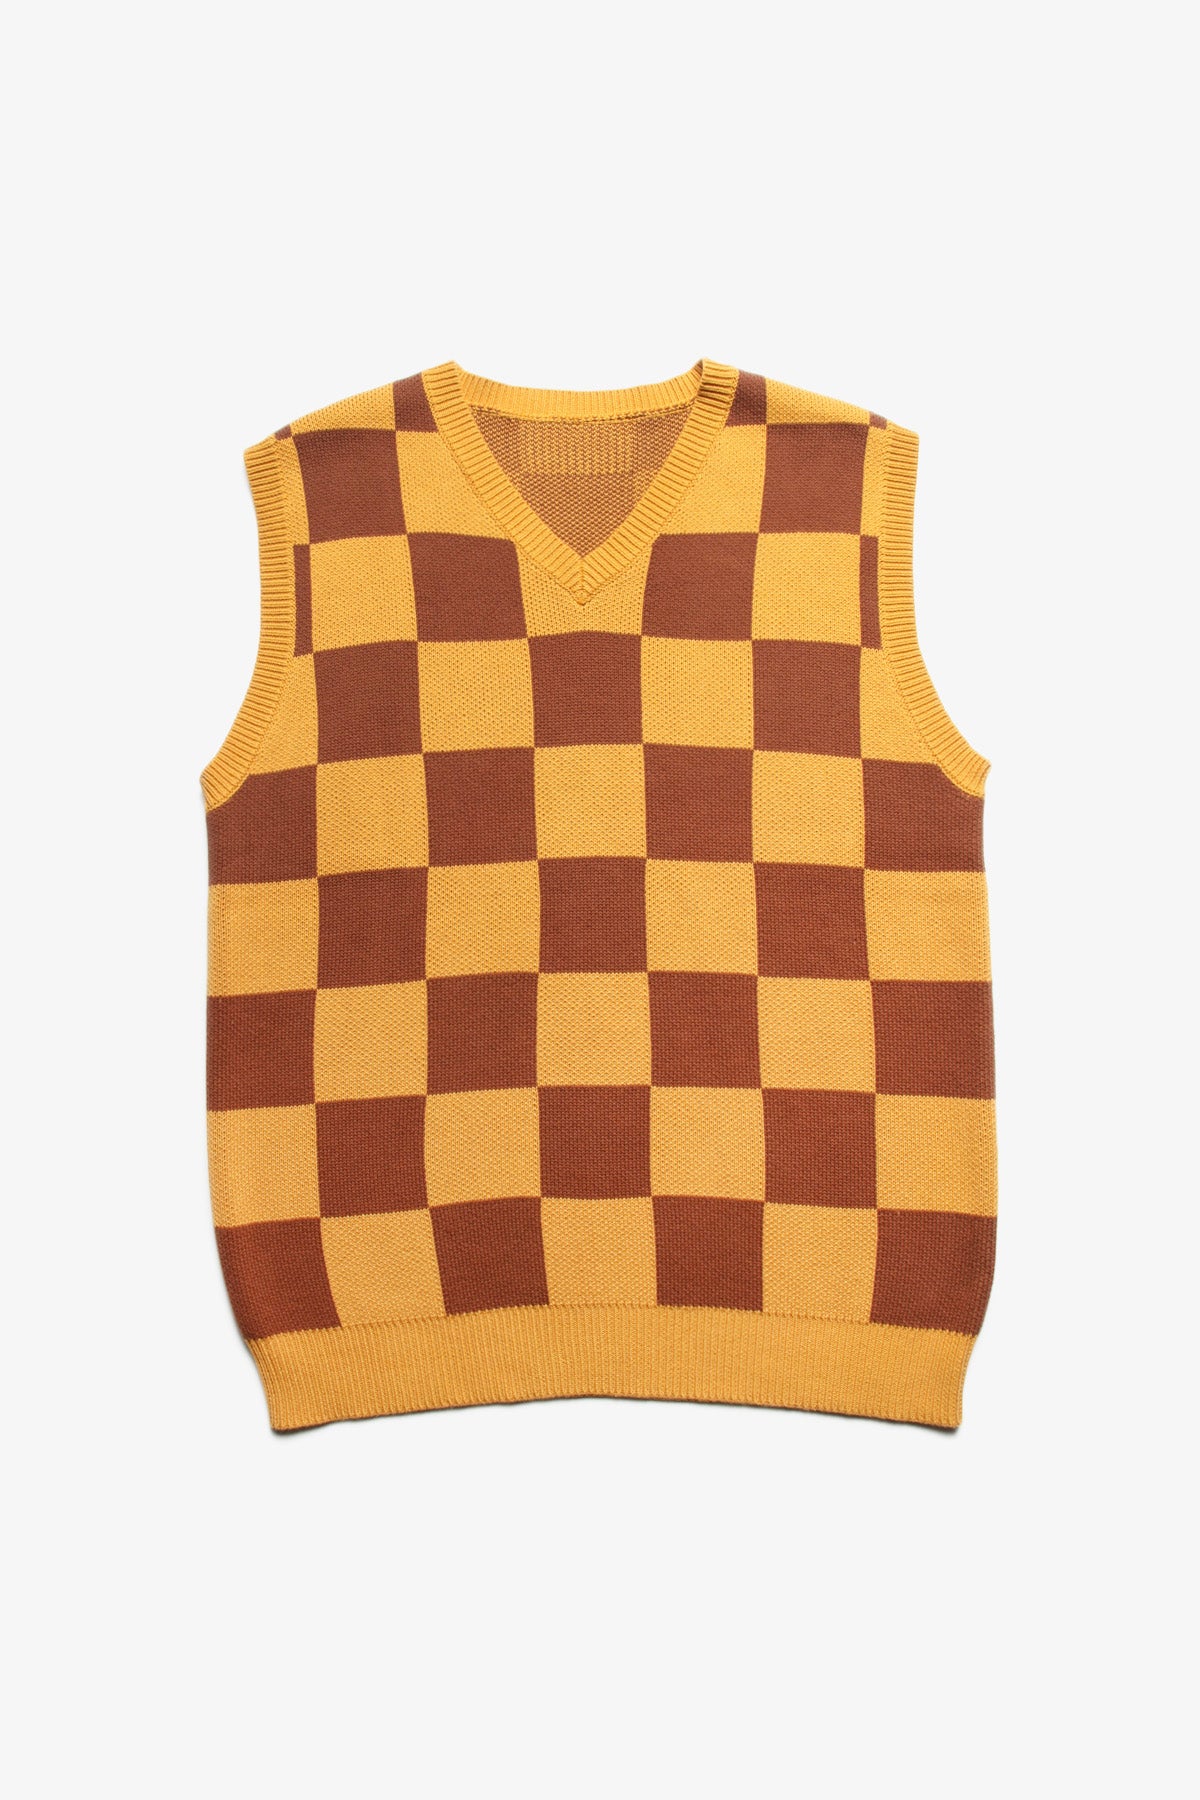 Service Works - Checkerboard Knitted Vest - Pecan